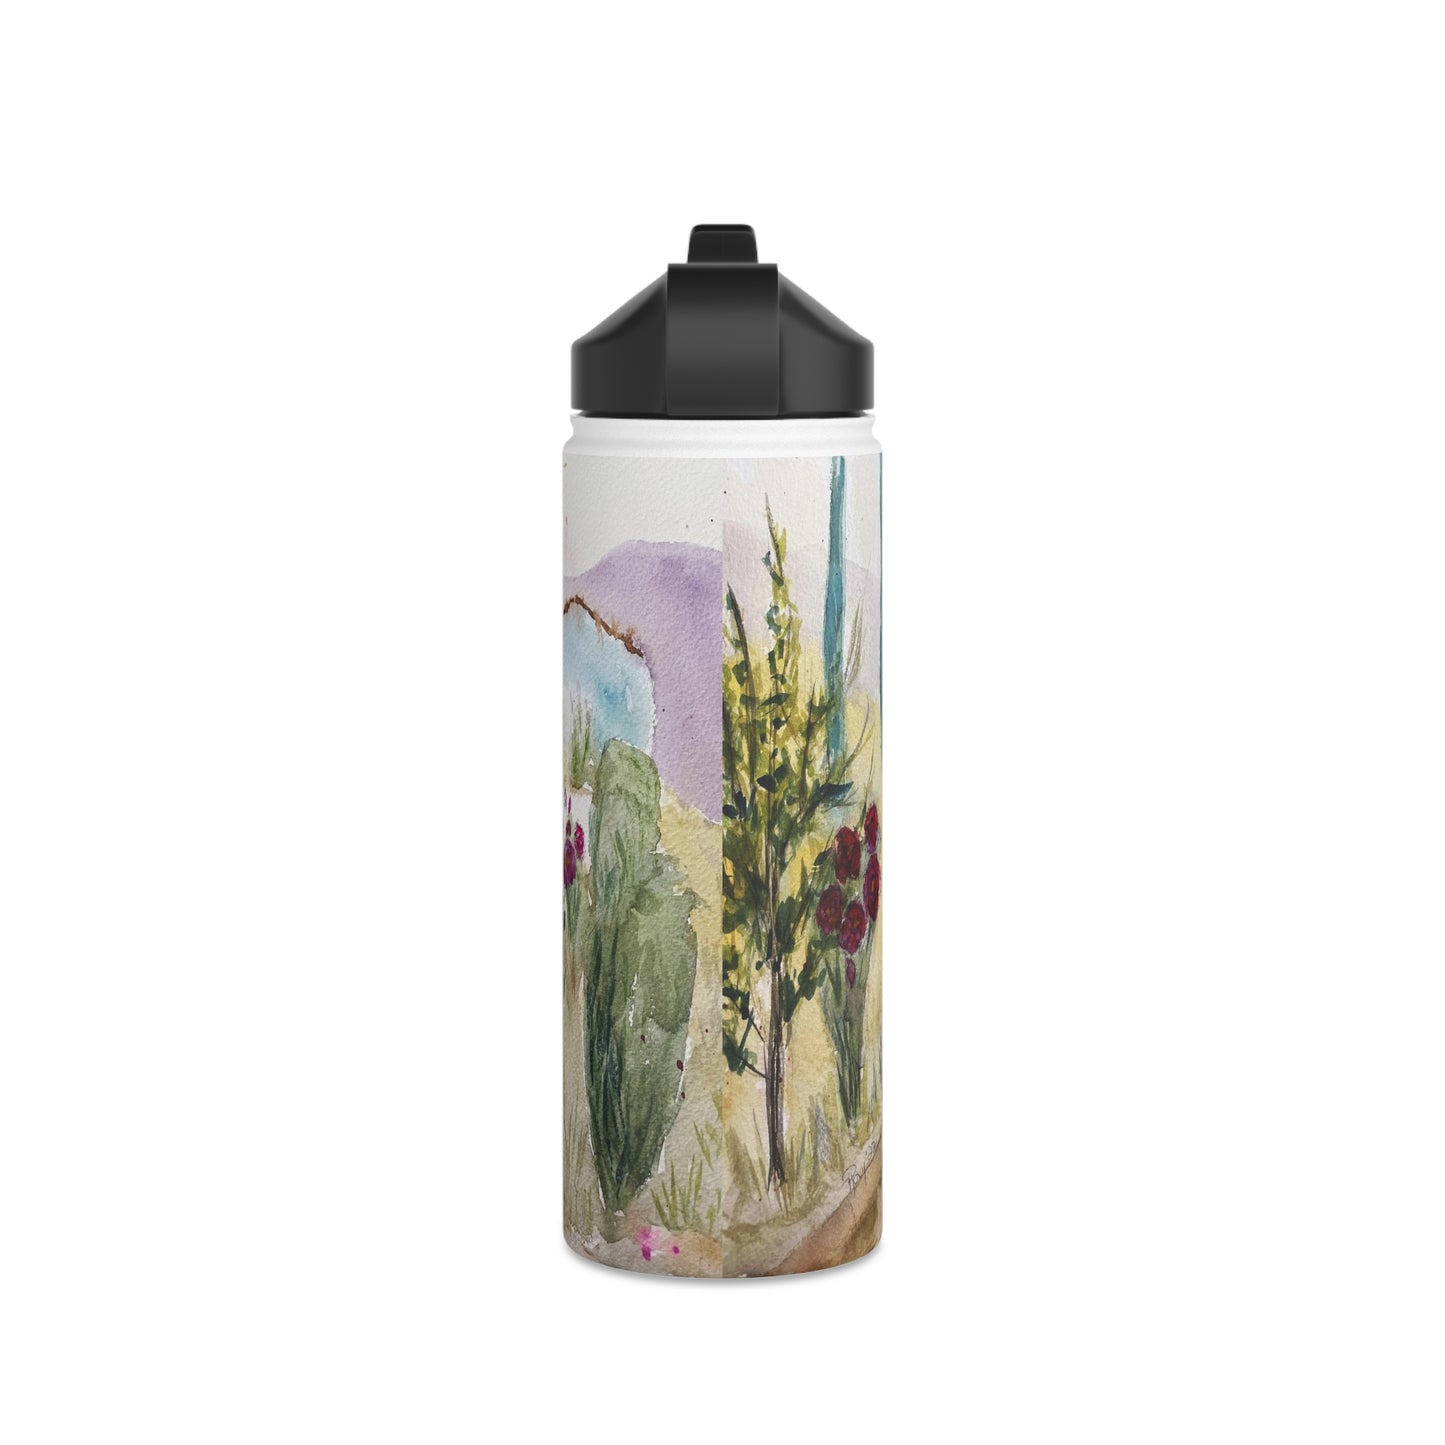 Christina's Garden at GBV Temecula Stainless Steel Water Bottle, Standard Lid